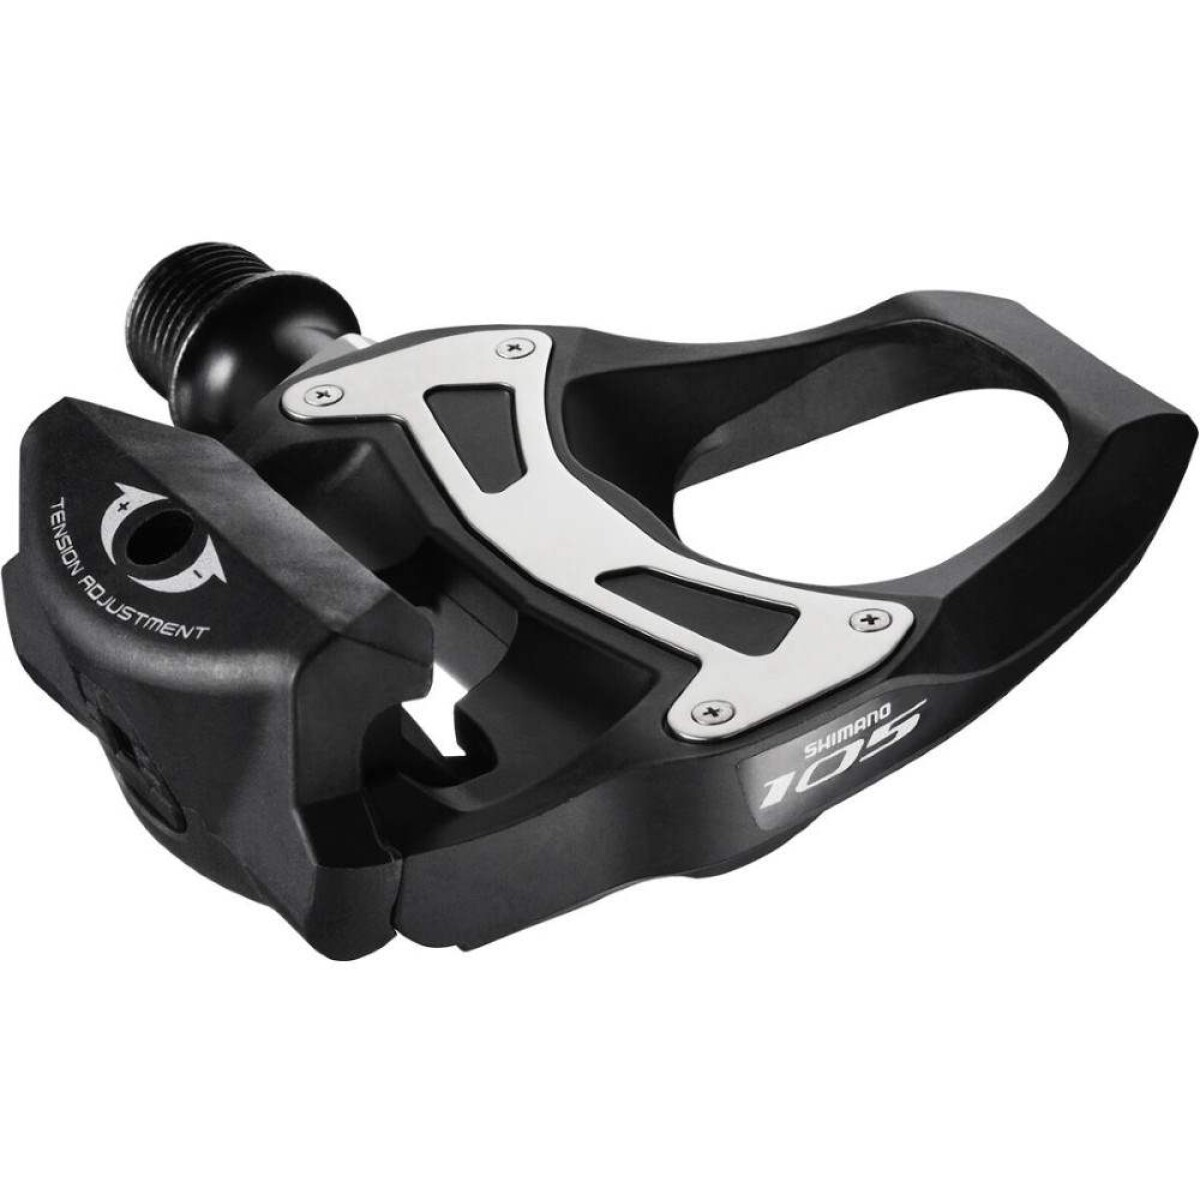 Pedales Shimano 105 Pd-r5800 